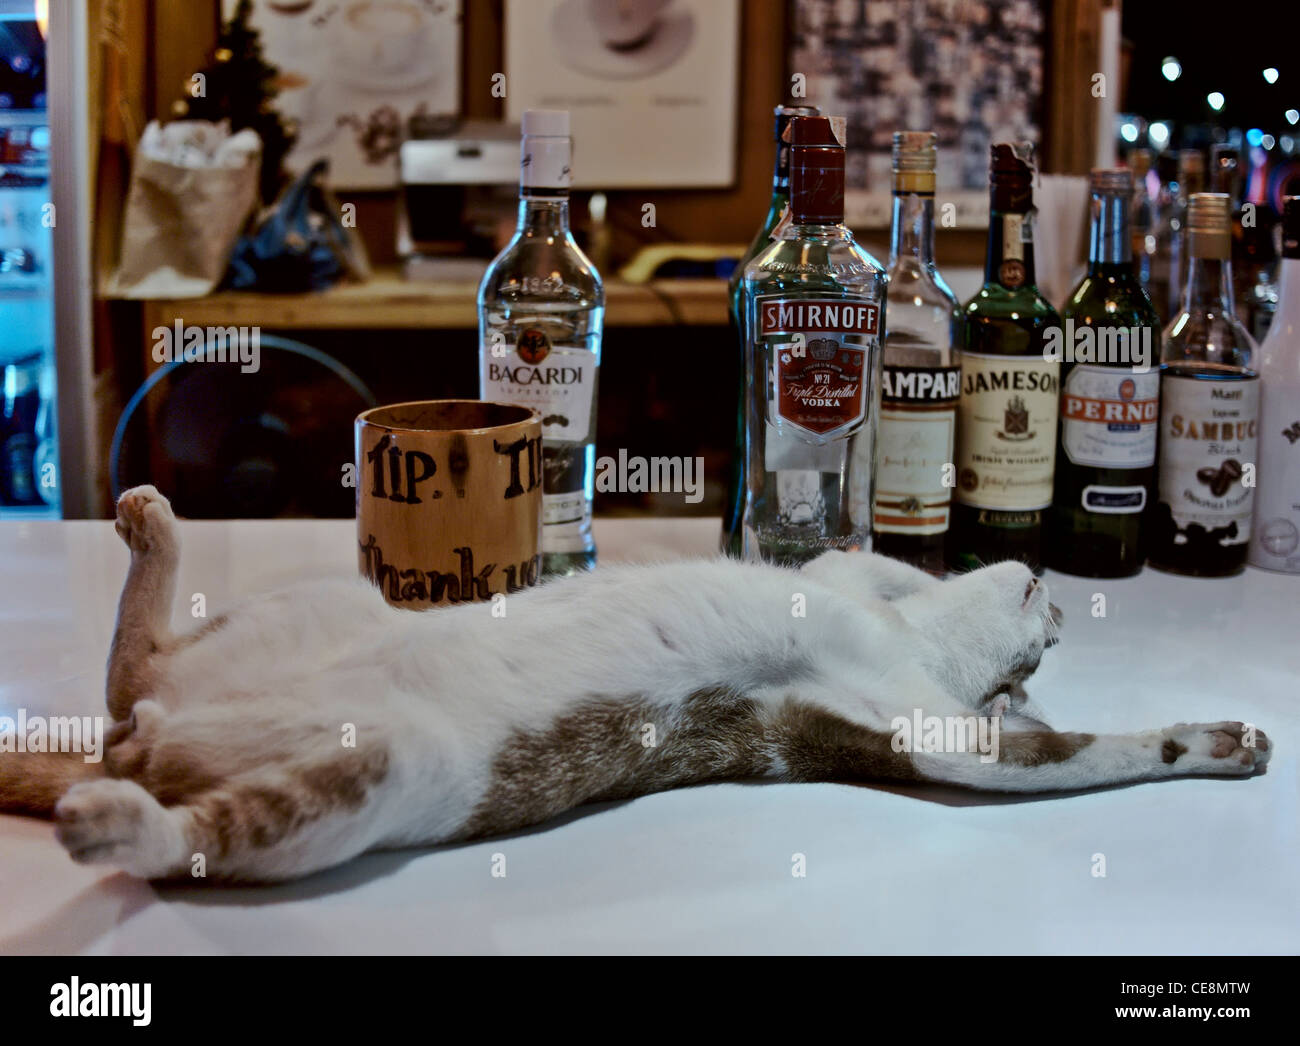 Funny animal. Cat sleeping at a beer bar seemingly drunk under the influence of alcohol. Thailand Southeast Asia Stock Photo